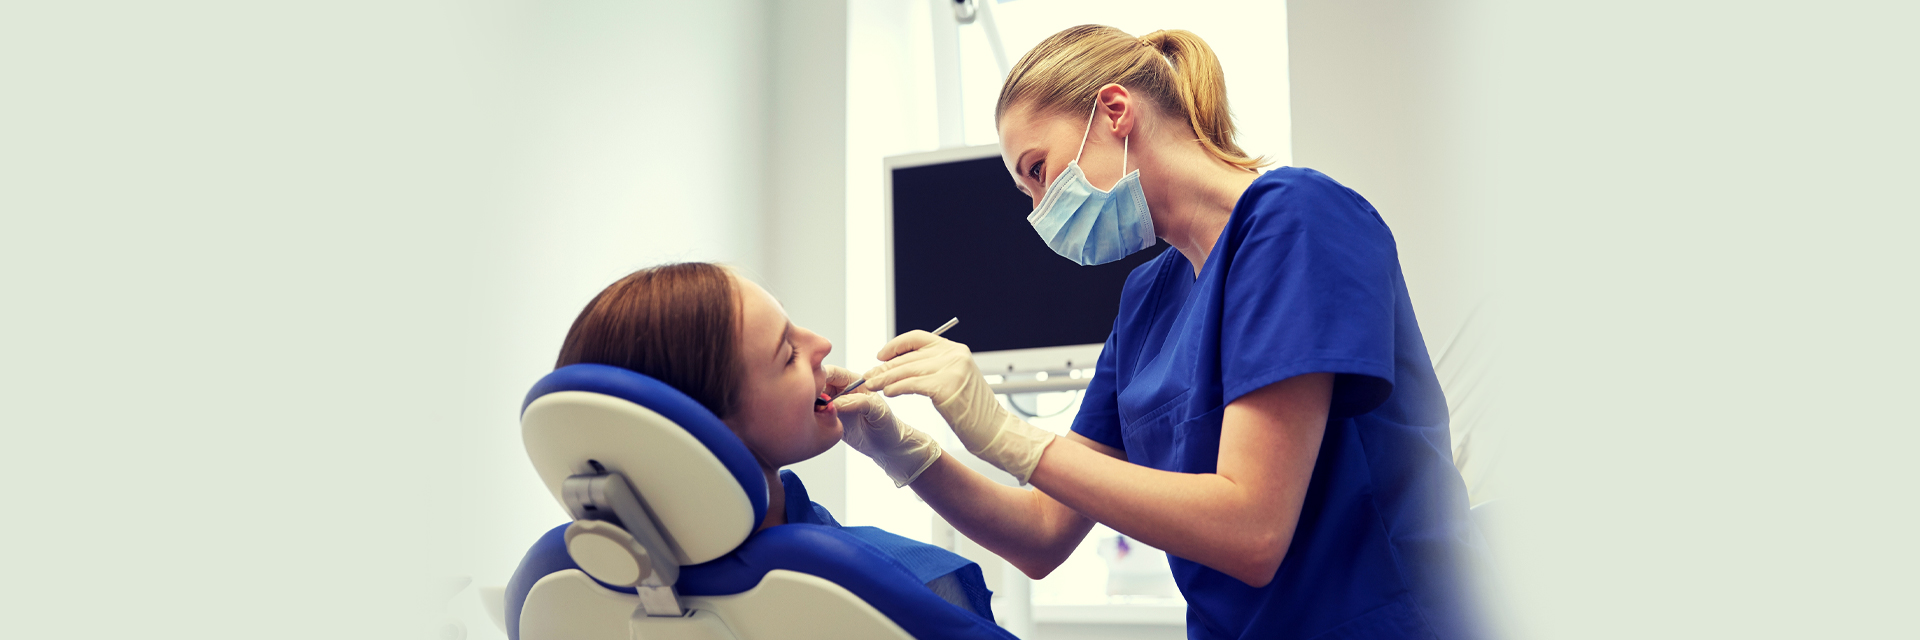 Top 3 Procedures Done On Your Dentist Appointment